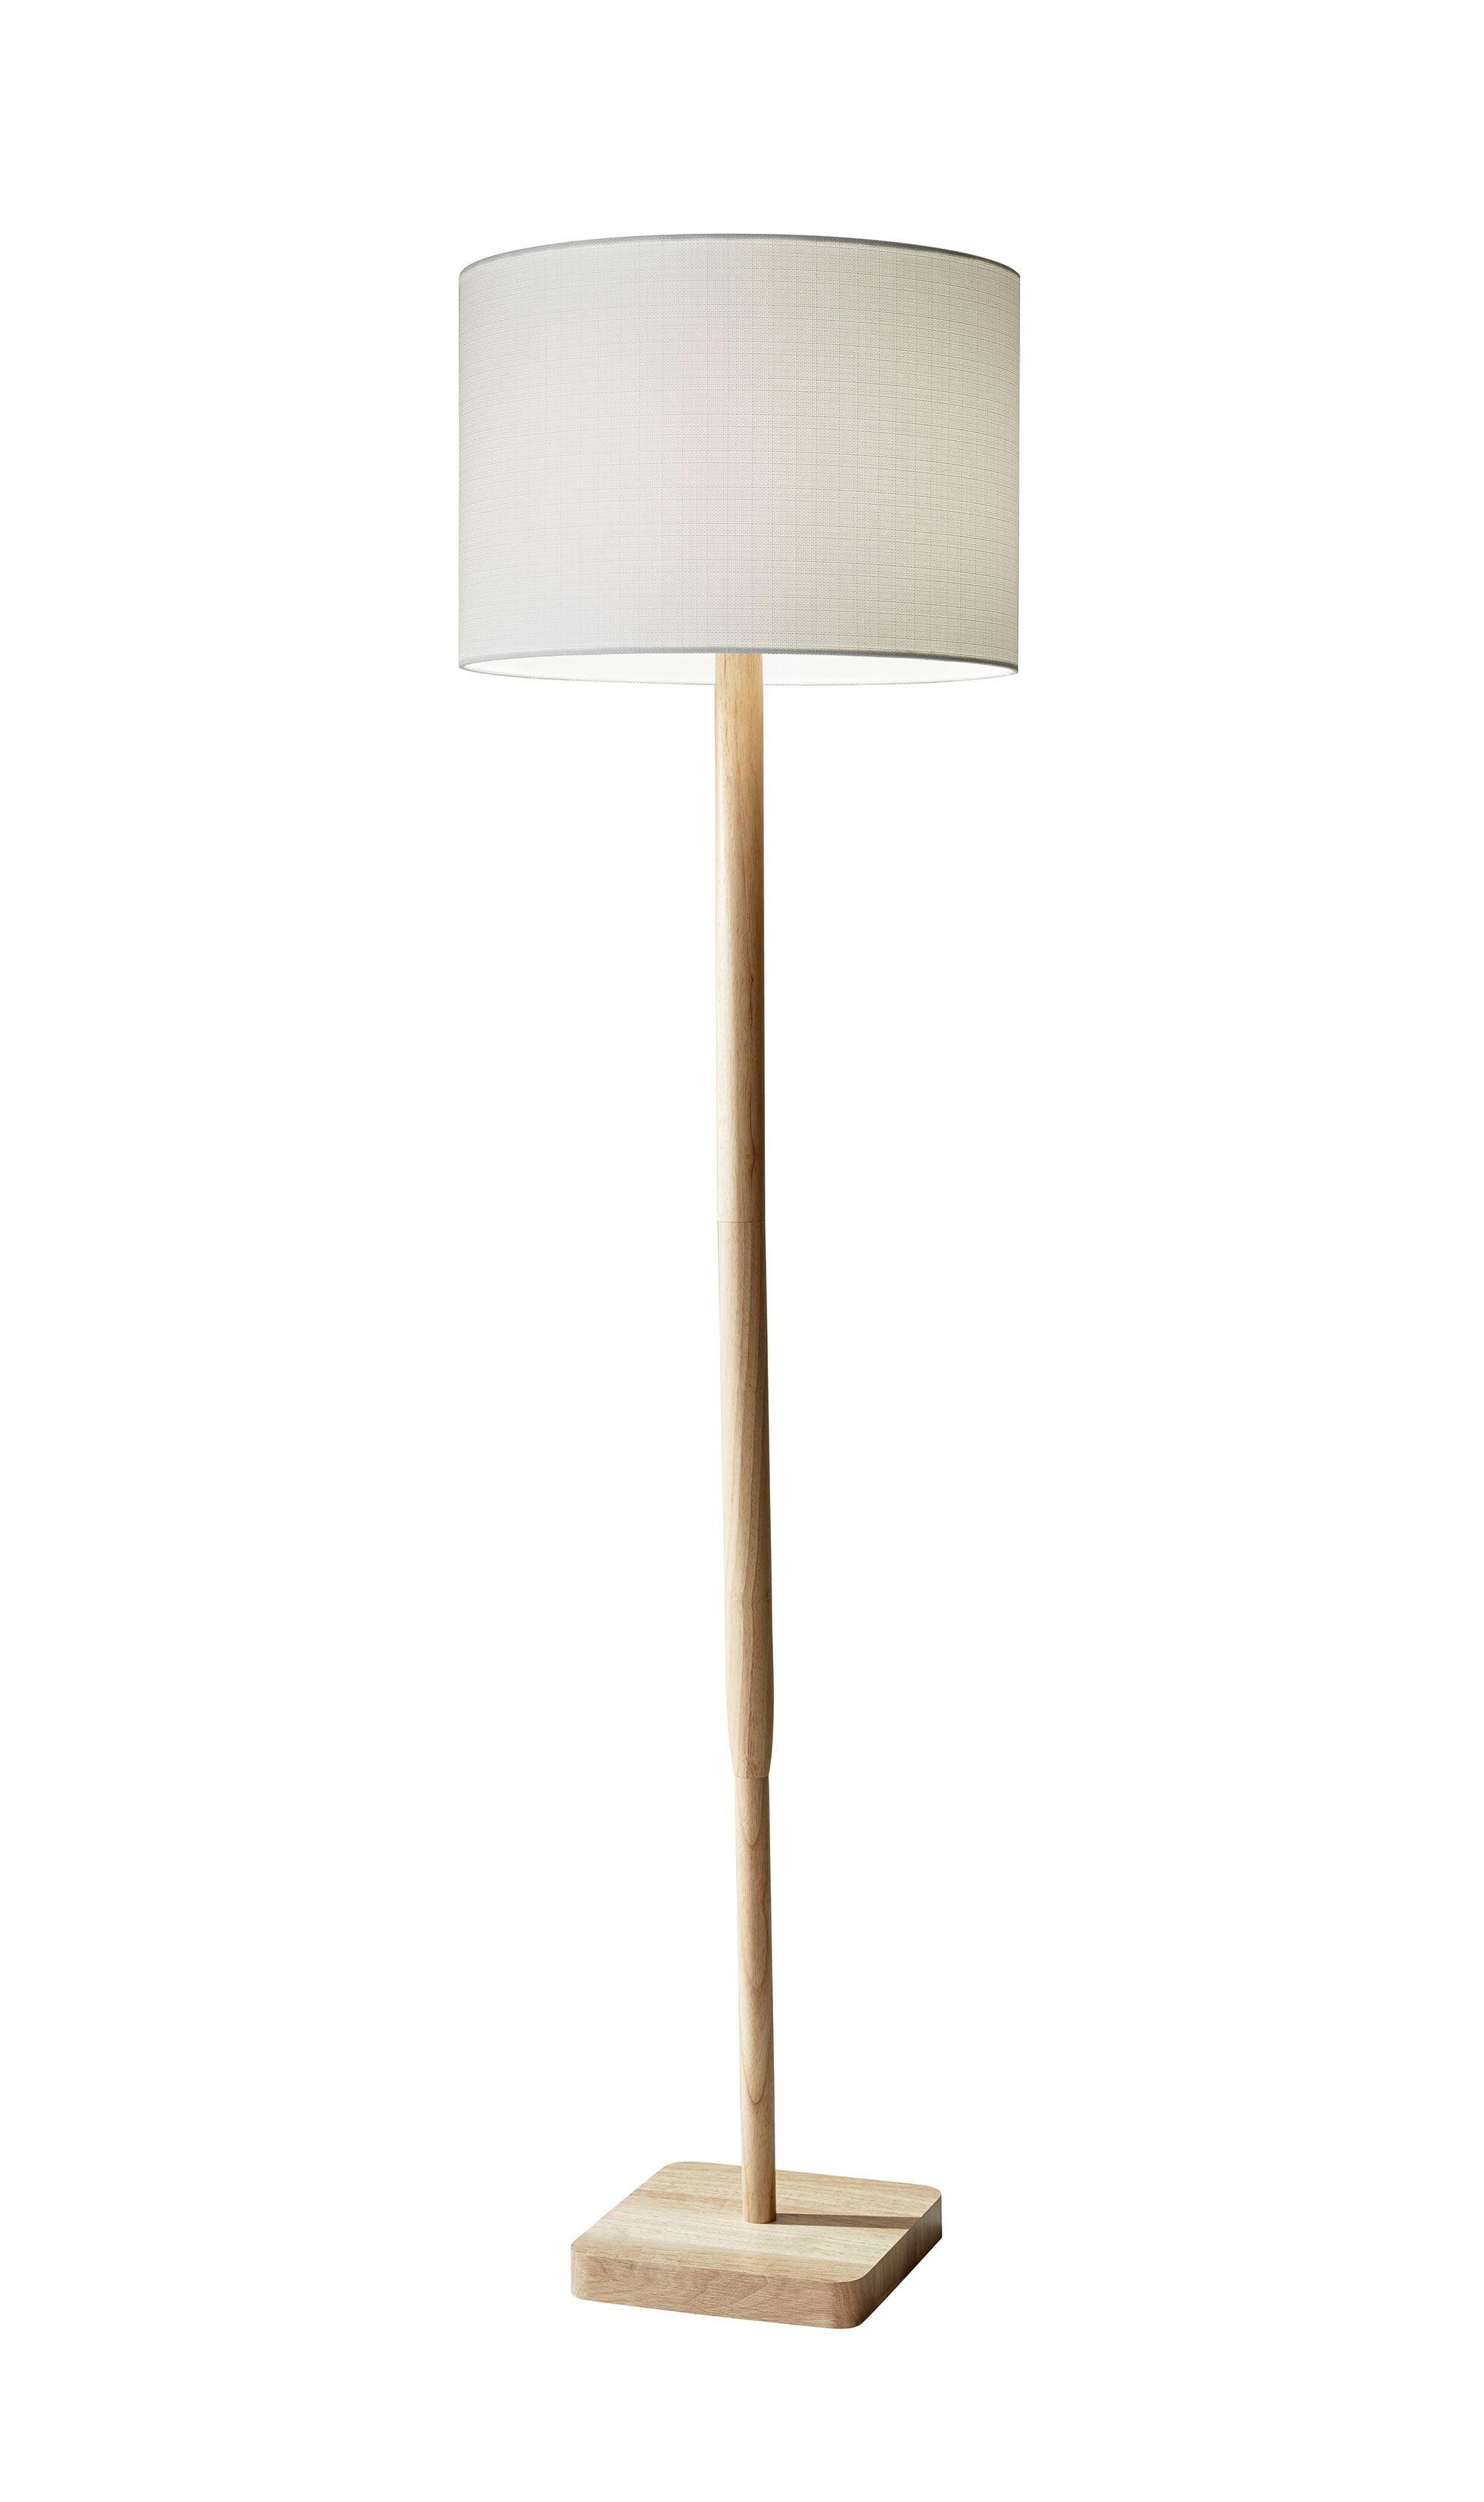 Ellis 58.5" Natural Rubber Wood Floor Lamp with Textured White Shade